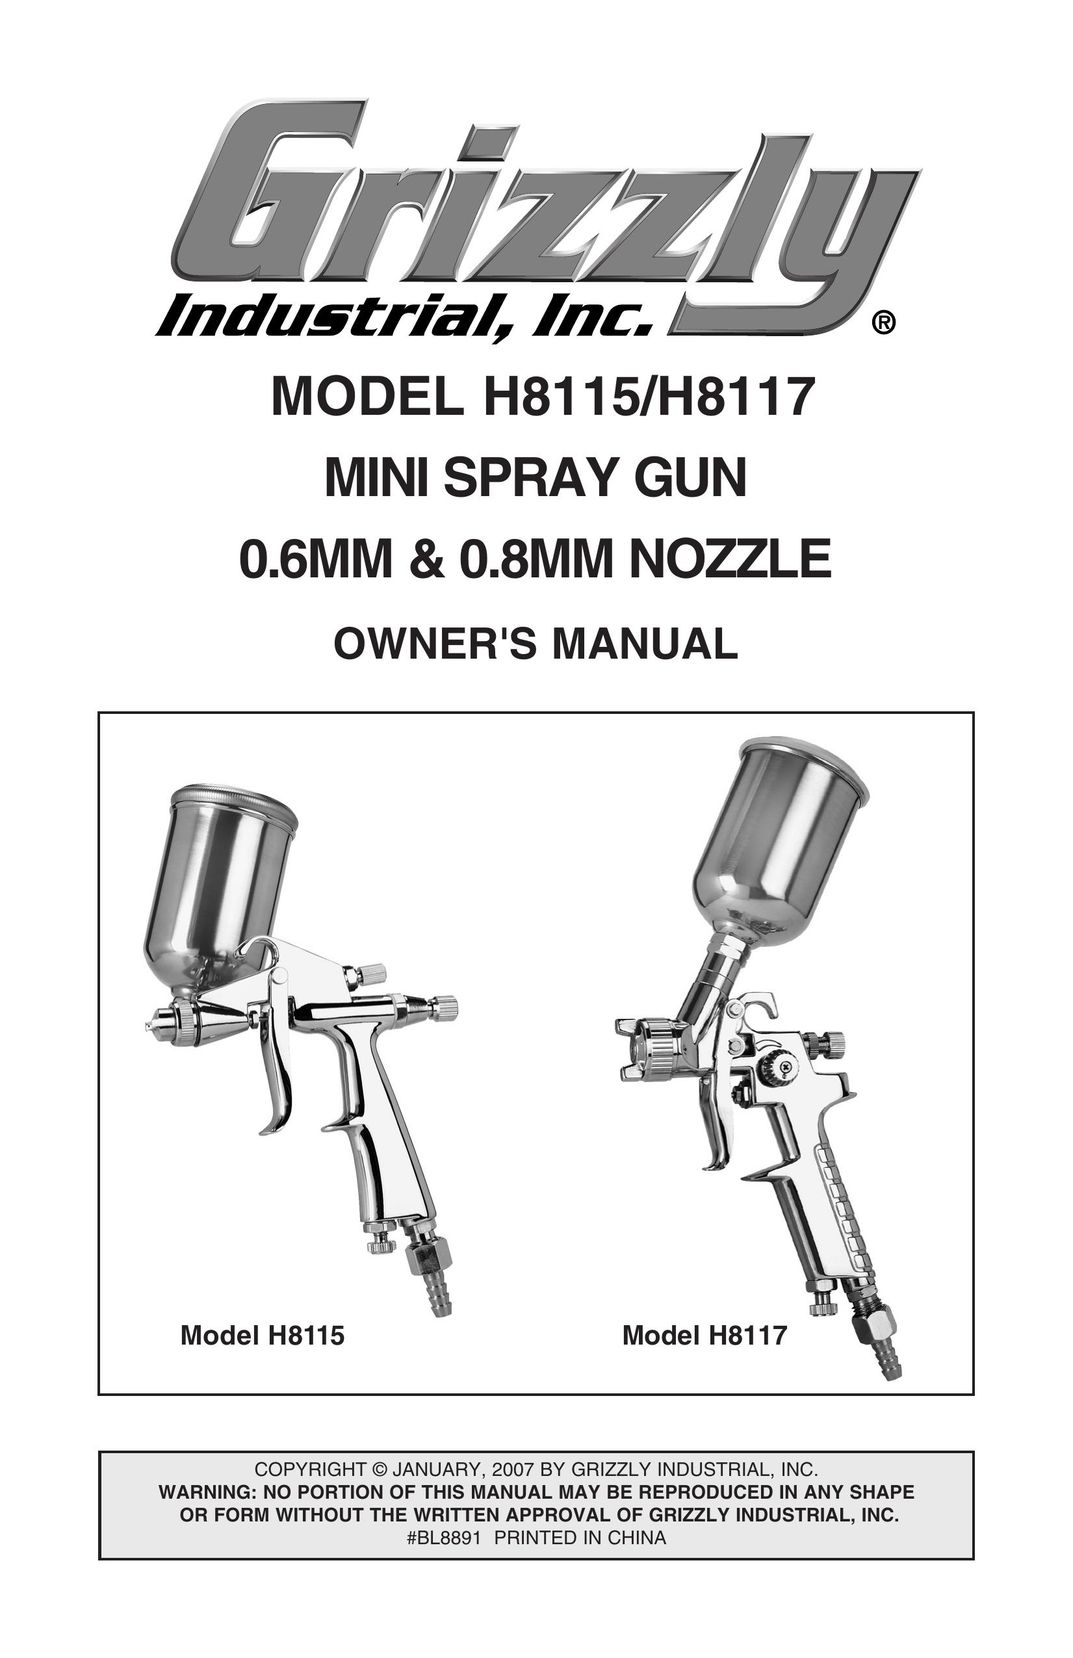 Grizzly H8115 Paint Sprayer User Manual